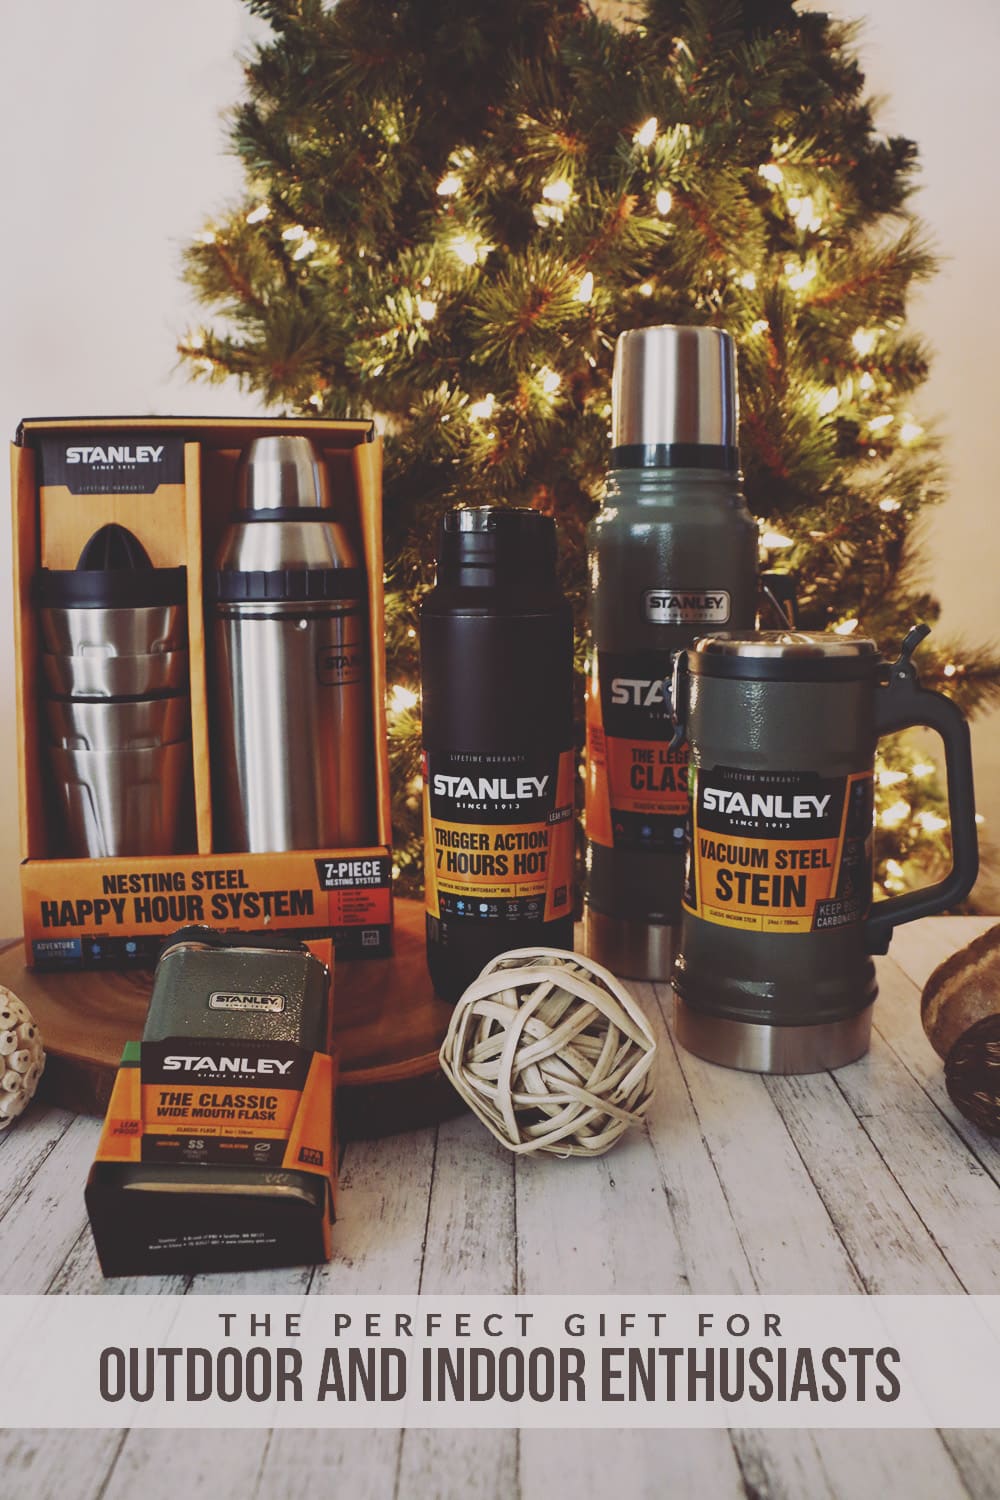 Why Stanley gear is the perfect gift for both indoor and outdoor enthusiasts! 